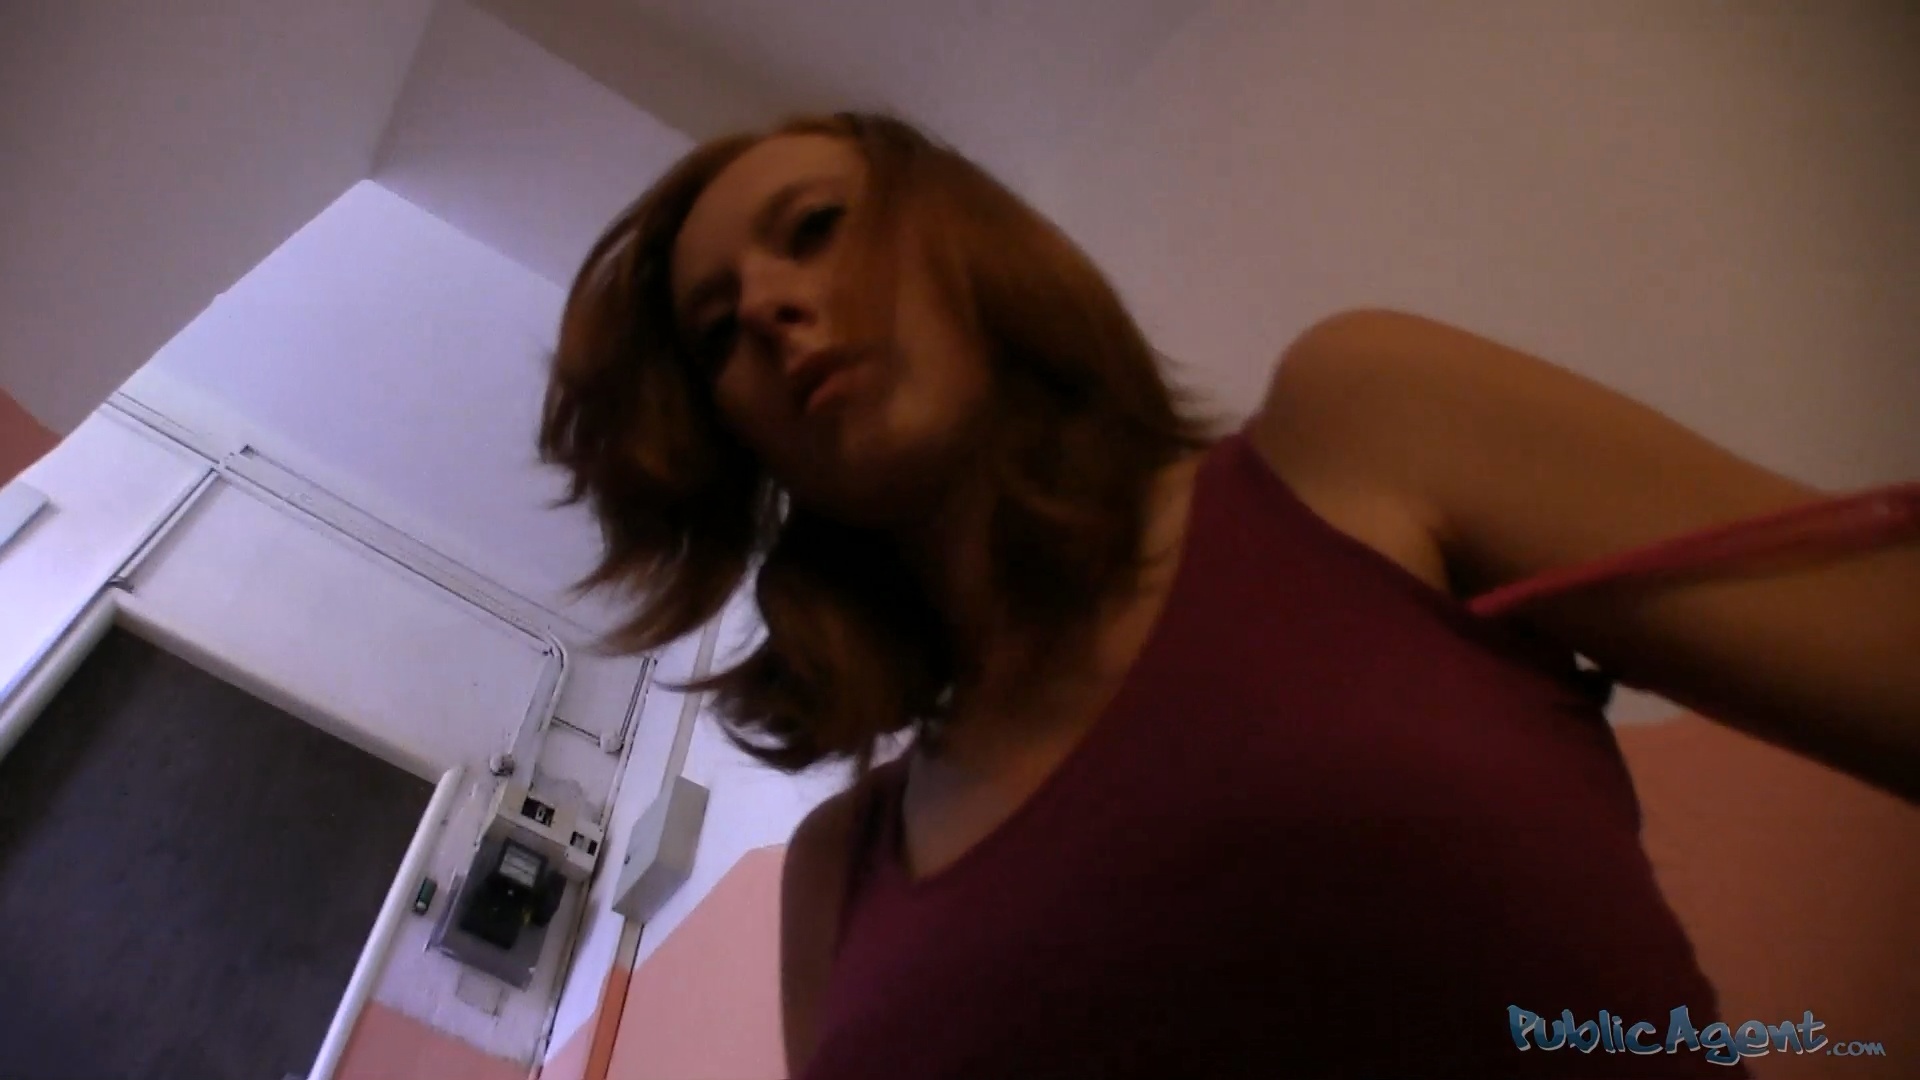 PublicAgent - Linda - Fake College Inspector Gets Redhead to Pay with Blowjob